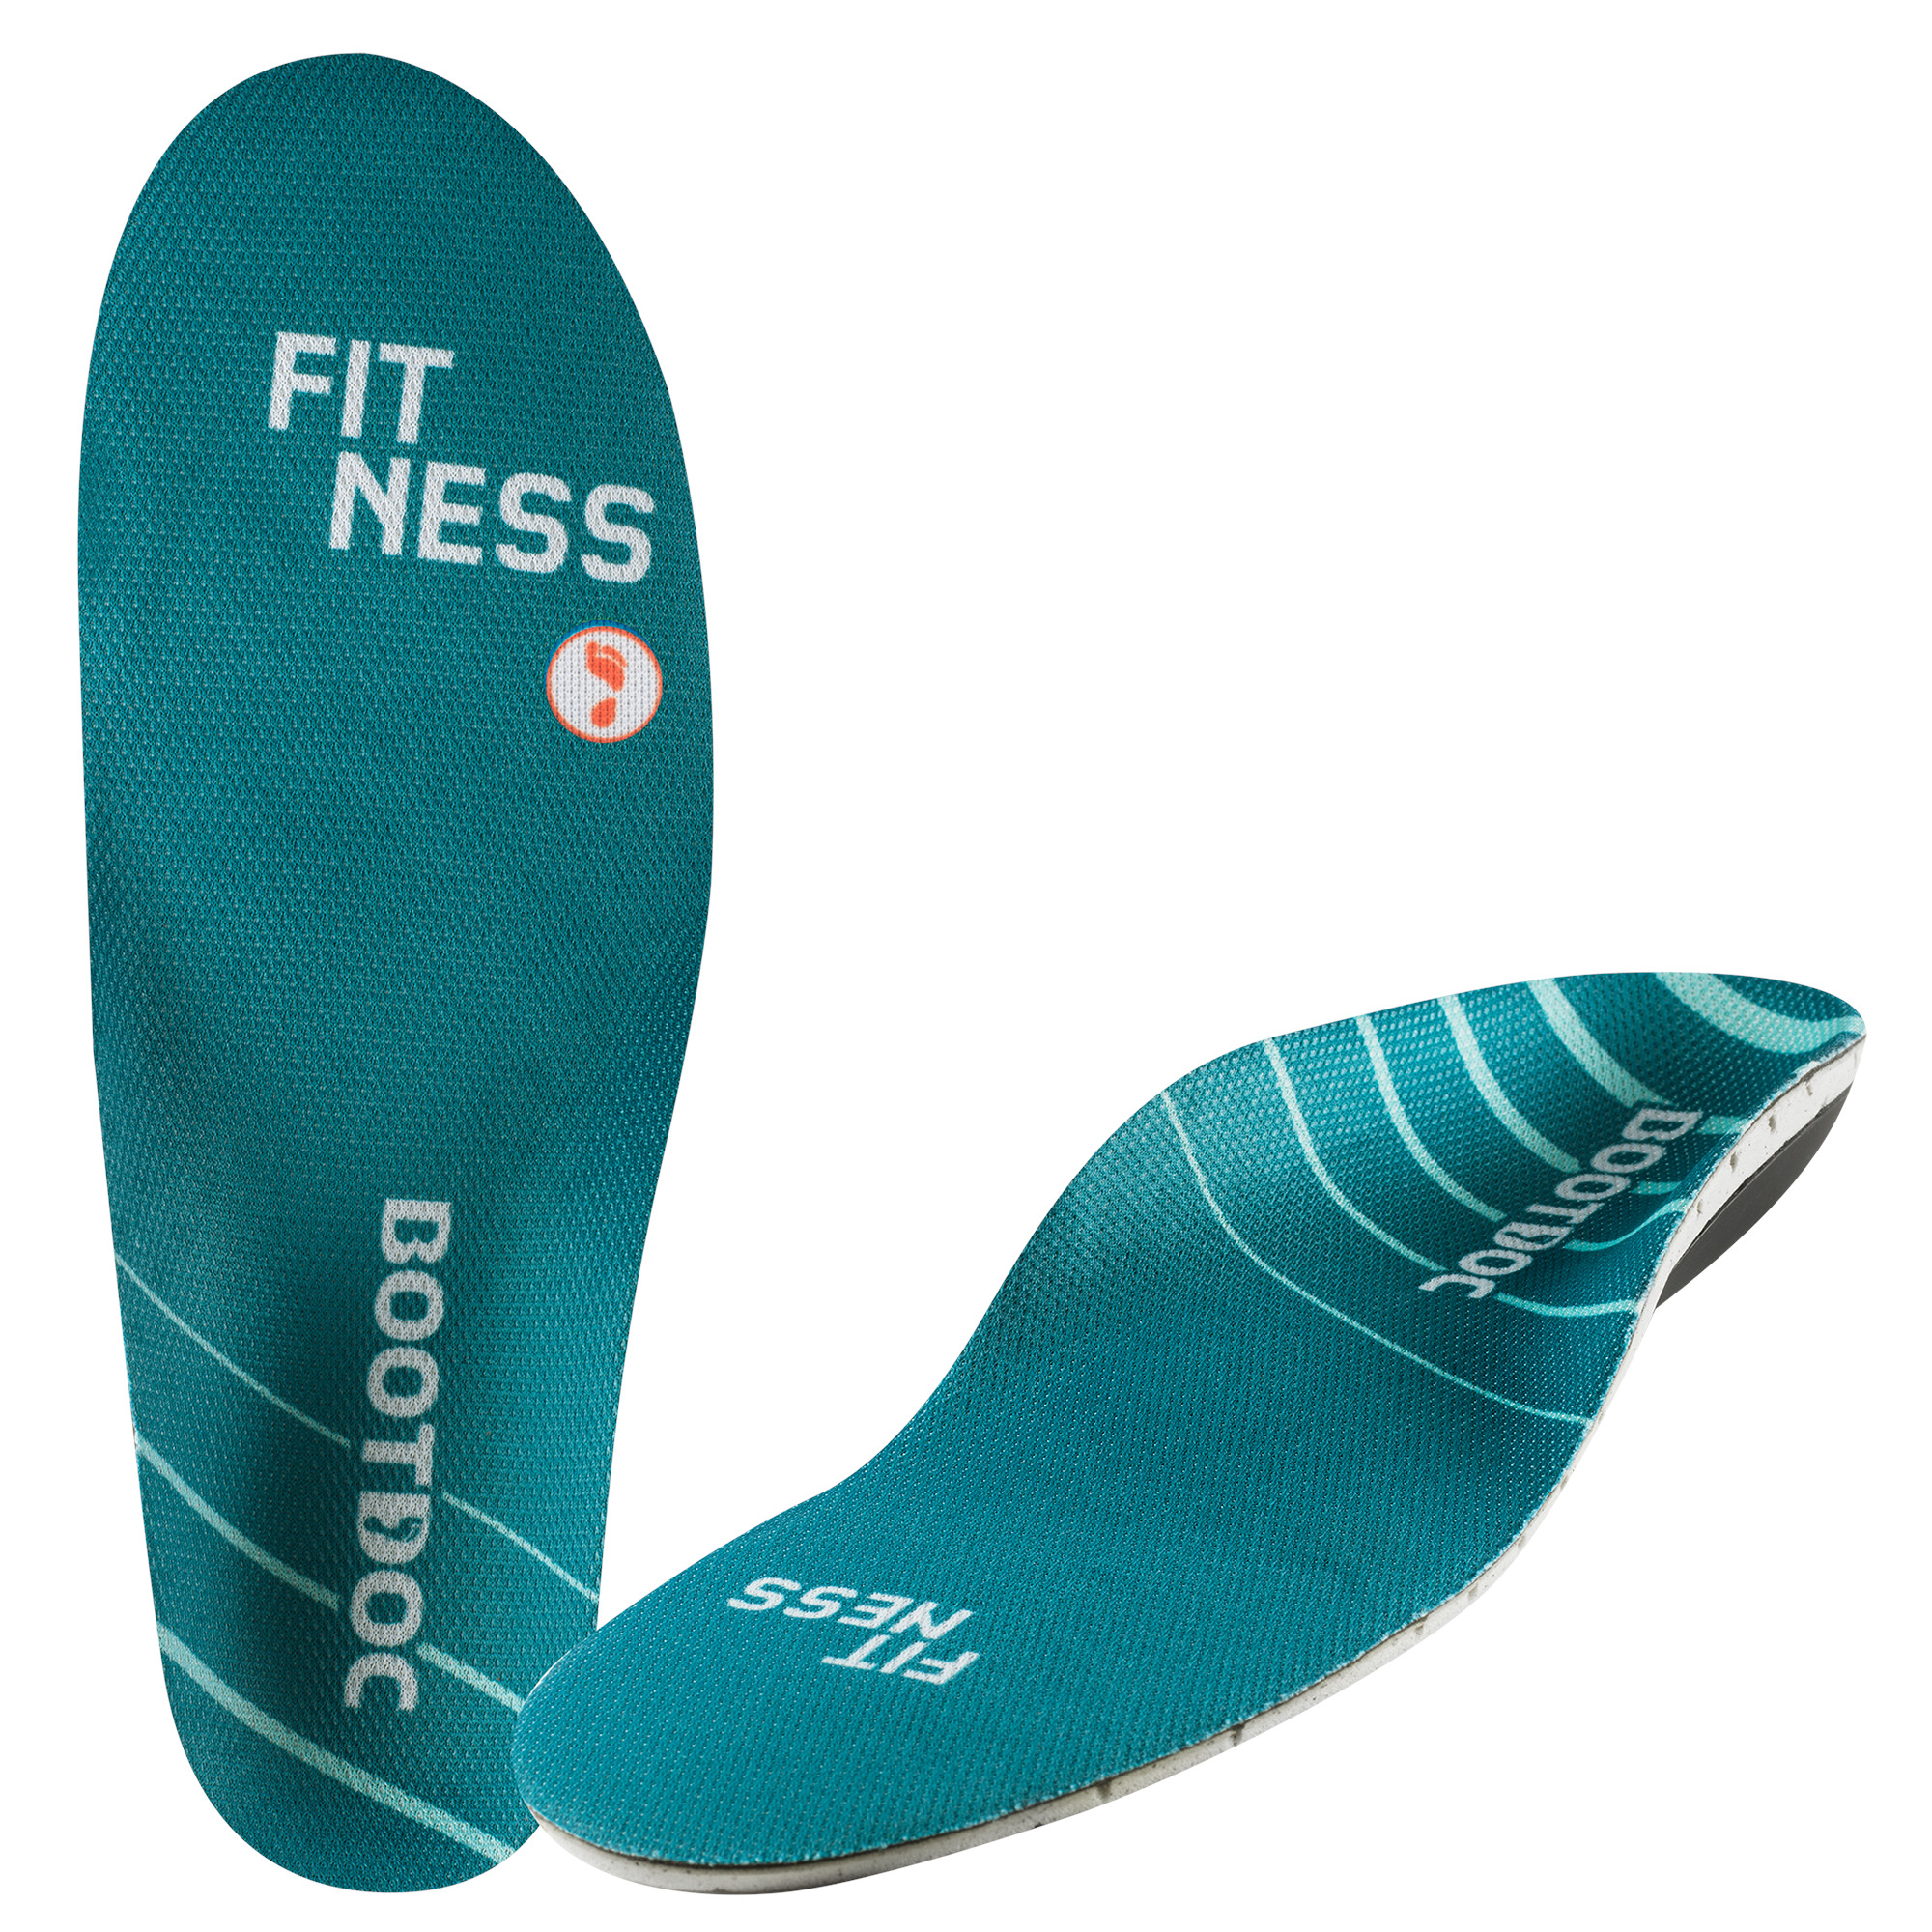 FITNESS High Arch insoles